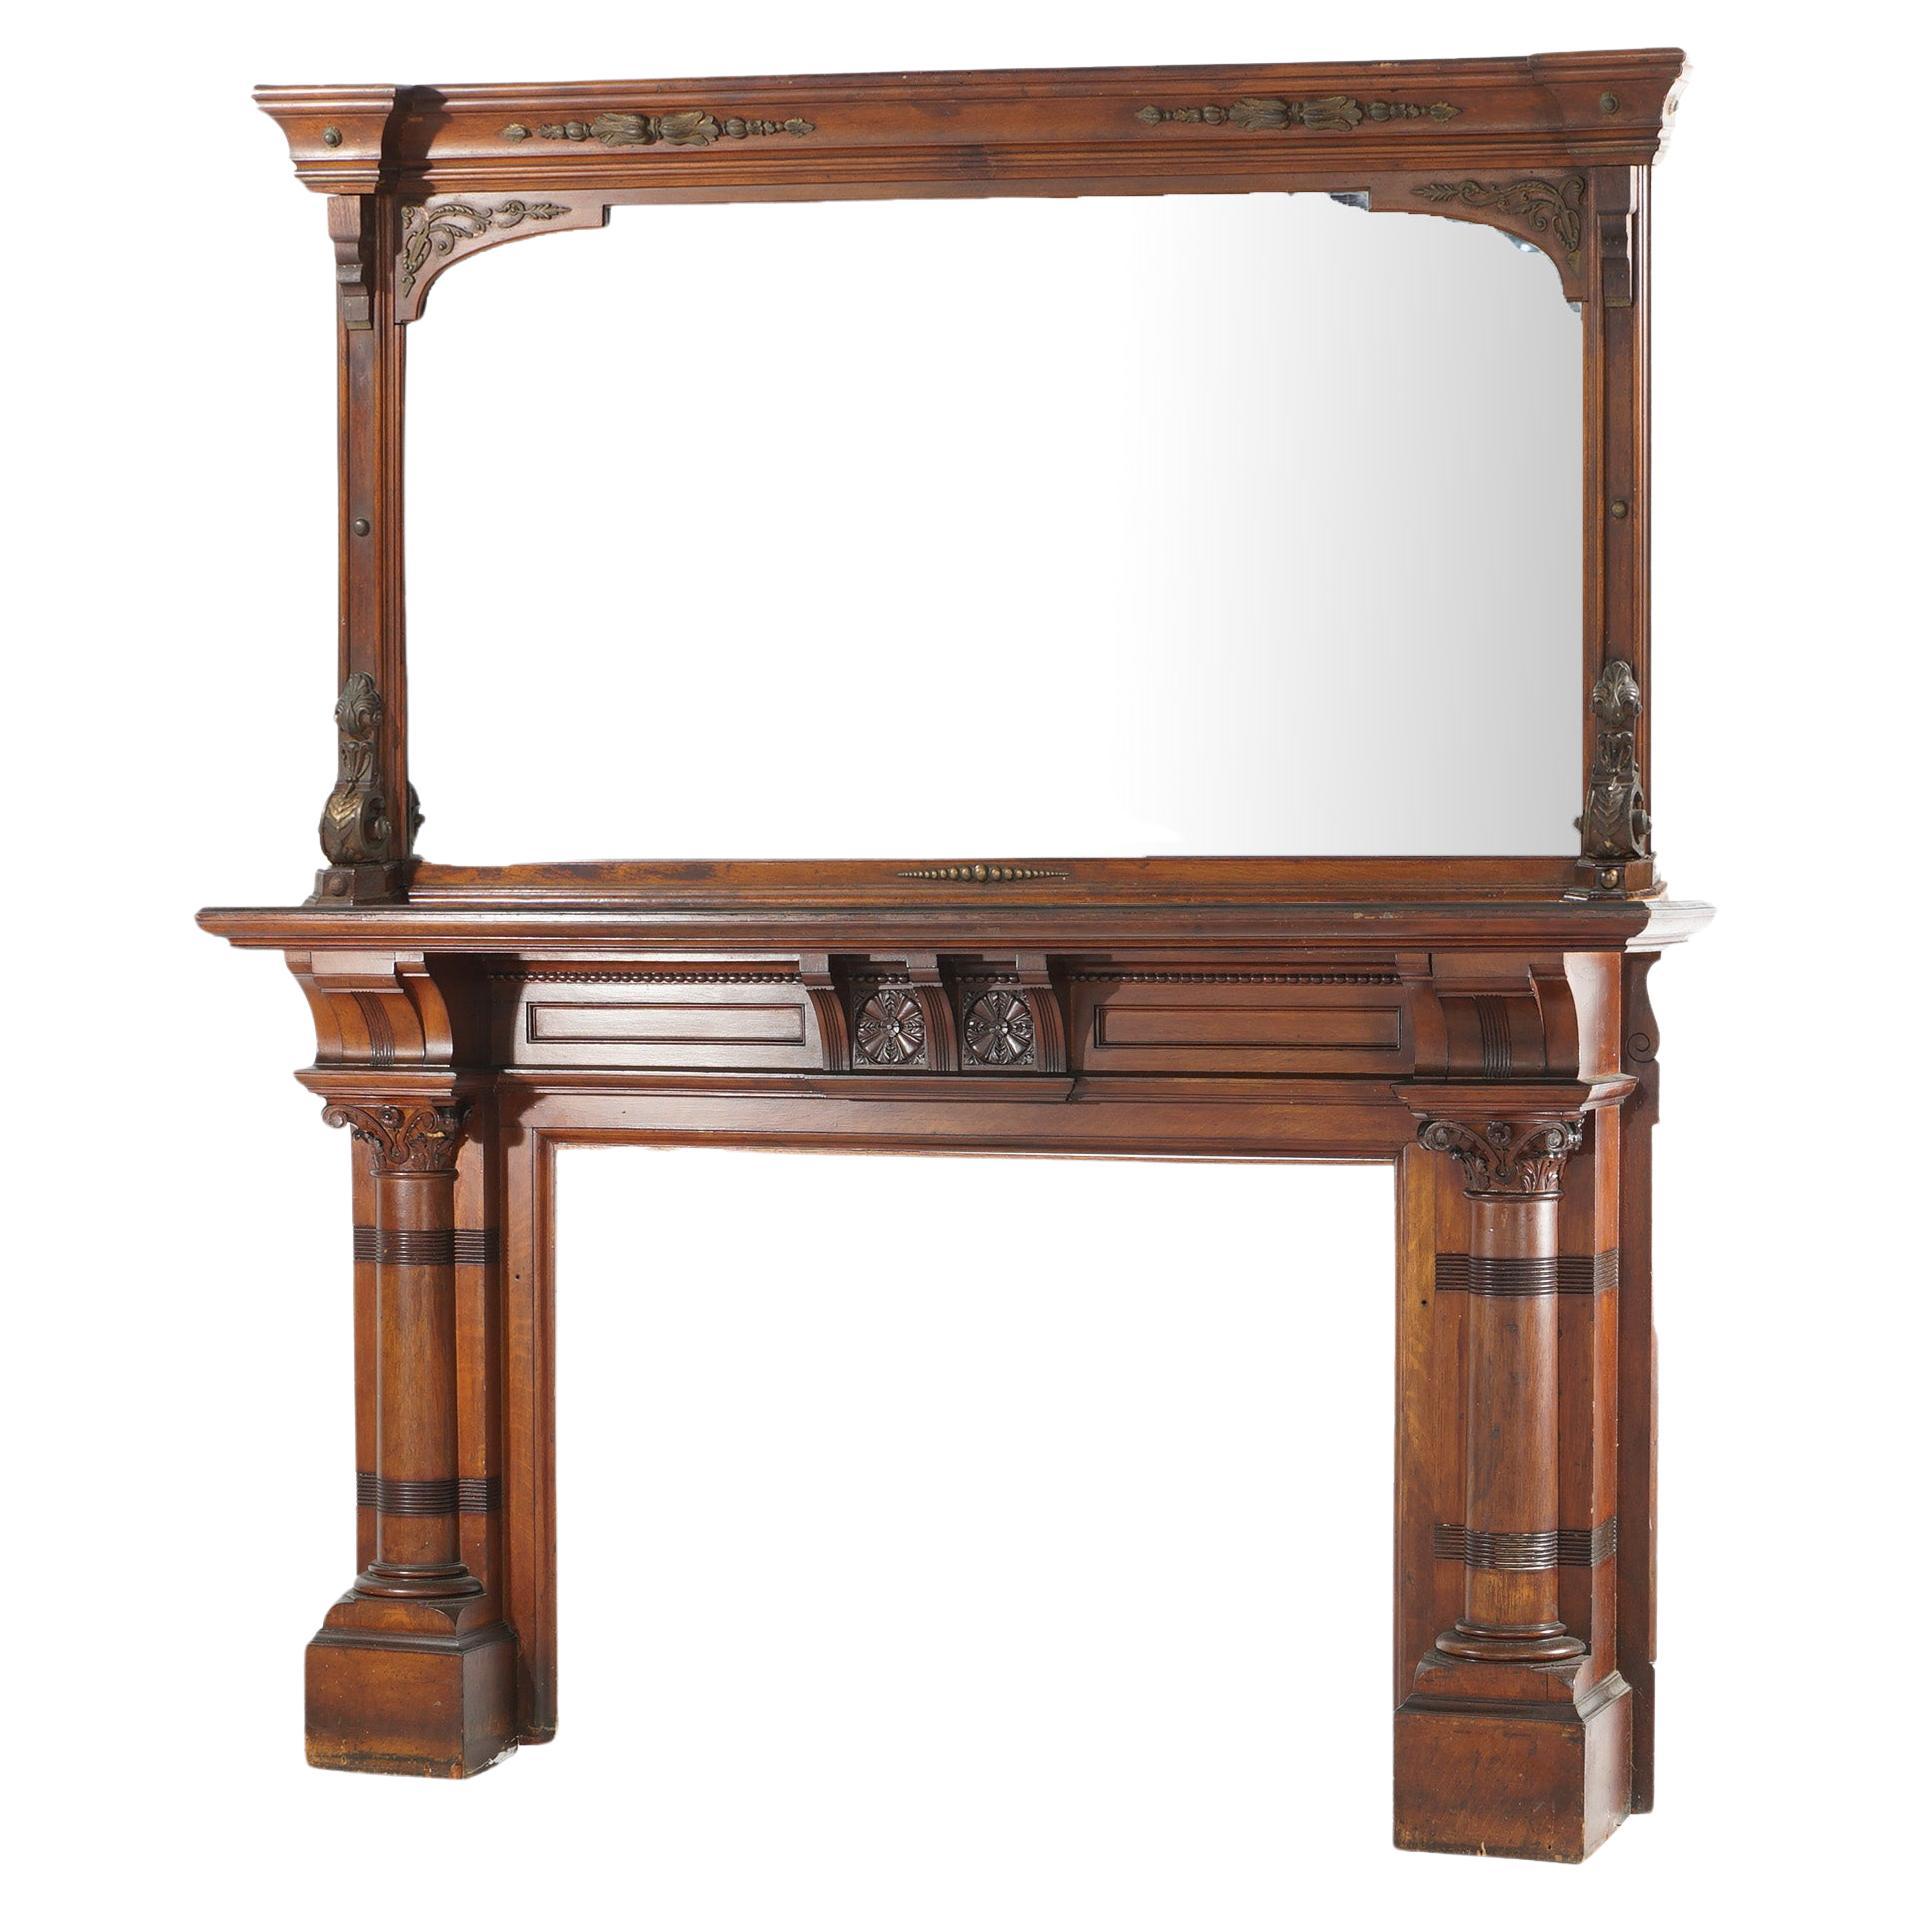 Antique R J Horner Neoclassical Oversized Oak Fireplace Mantle & Mirror C1890 For Sale